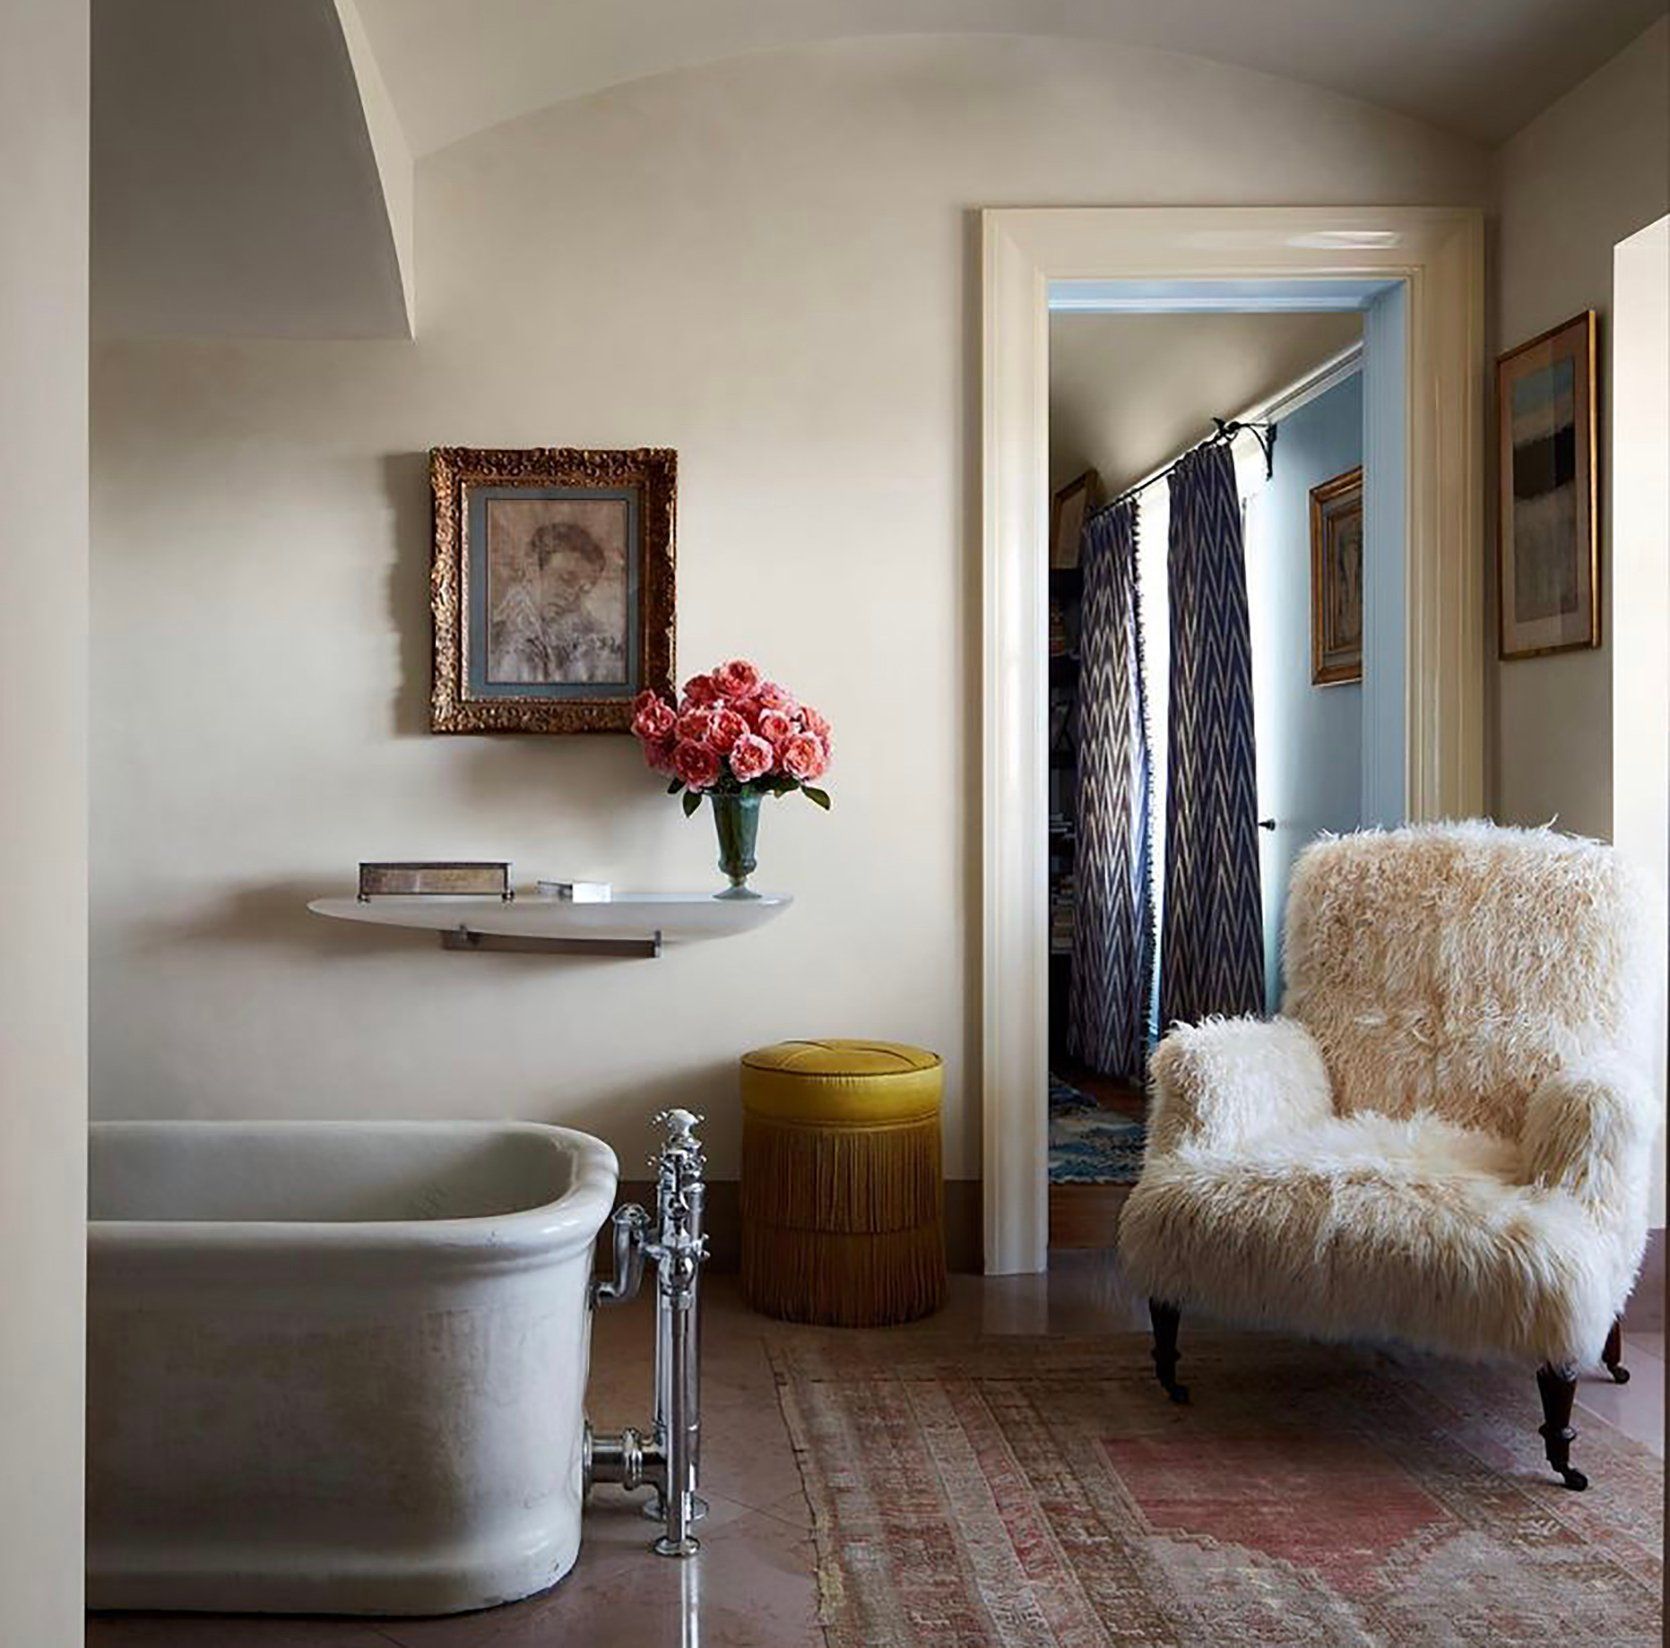 Bathroom Chairs: Comfort and Convenience for Your Bathroom